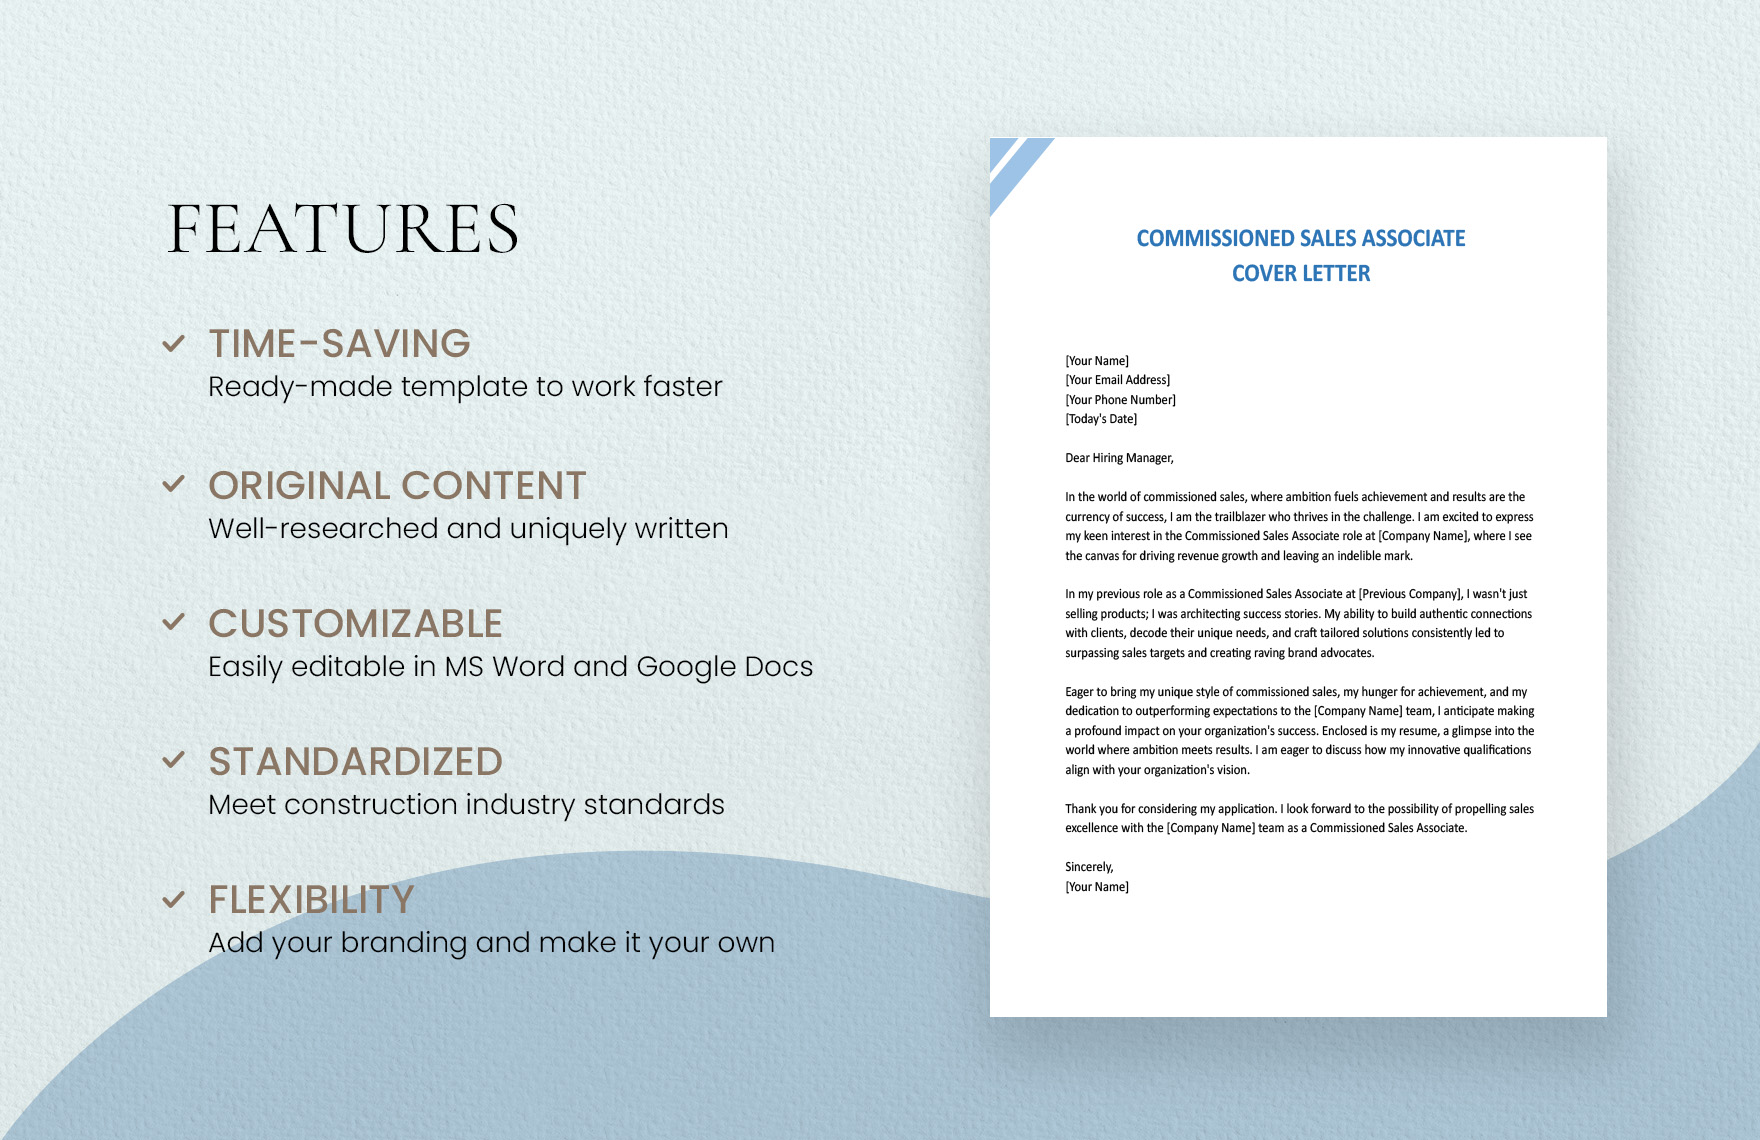 Commissioned Sales Associate Cover Letter